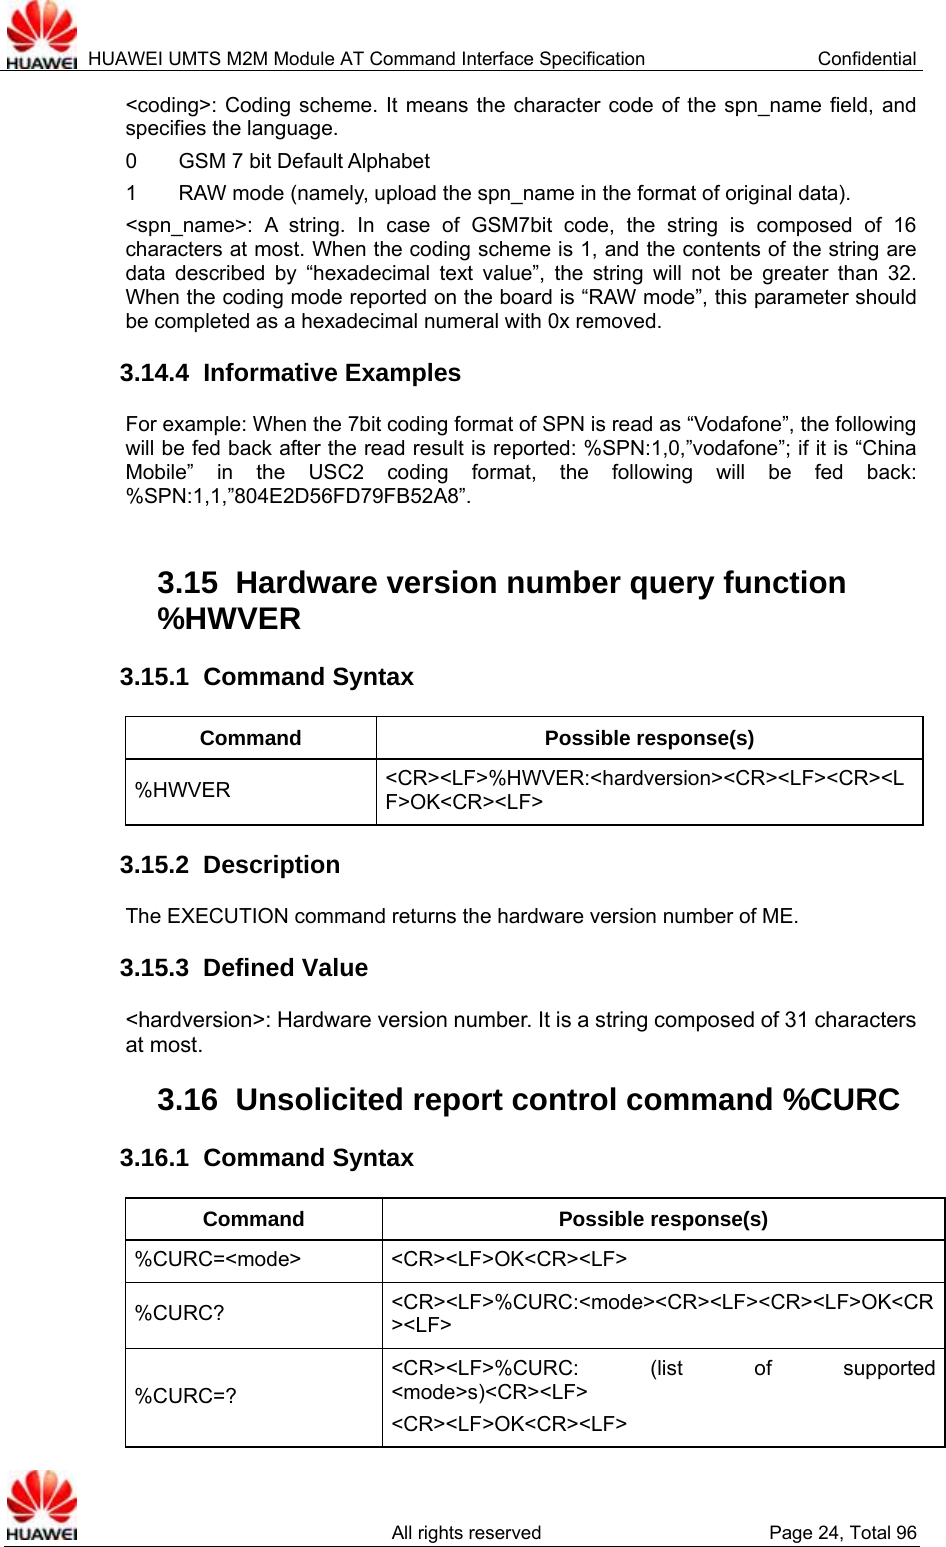  HUAWEI UMTS M2M Module AT Command Interface Specification  Confidential   All rights reserved  Page 24, Total 96 &lt;coding&gt;: Coding scheme. It means the character code of the spn_name field, and specifies the language.   0    GSM 7 bit Default Alphabet 1    RAW mode (namely, upload the spn_name in the format of original data).   &lt;spn_name&gt;: A string. In case of GSM7bit code, the string is composed of 16 characters at most. When the coding scheme is 1, and the contents of the string are data described by “hexadecimal text value”, the string will not be greater than 32. When the coding mode reported on the board is “RAW mode”, this parameter should be completed as a hexadecimal numeral with 0x removed.   3.14.4  Informative Examples For example: When the 7bit coding format of SPN is read as “Vodafone”, the following will be fed back after the read result is reported: %SPN:1,0,”vodafone”; if it is “China Mobile” in the USC2 coding format, the following will be fed back: %SPN:1,1,”804E2D56FD79FB52A8”.  3.15  Hardware version number query function %HWVER  3.15.1  Command Syntax Command Possible response(s) %HWVER  &lt;CR&gt;&lt;LF&gt;%HWVER:&lt;hardversion&gt;&lt;CR&gt;&lt;LF&gt;&lt;CR&gt;&lt;LF&gt;OK&lt;CR&gt;&lt;LF&gt; 3.15.2  Description The EXECUTION command returns the hardware version number of ME.   3.15.3  Defined Value &lt;hardversion&gt;: Hardware version number. It is a string composed of 31 characters at most. 3.16  Unsolicited report control command %CURC   3.16.1  Command Syntax Command Possible response(s) %CURC=&lt;mode&gt; &lt;CR&gt;&lt;LF&gt;OK&lt;CR&gt;&lt;LF&gt; %CURC?  &lt;CR&gt;&lt;LF&gt;%CURC:&lt;mode&gt;&lt;CR&gt;&lt;LF&gt;&lt;CR&gt;&lt;LF&gt;OK&lt;CR&gt;&lt;LF&gt; %CURC=? &lt;CR&gt;&lt;LF&gt;%CURC: (list of supported &lt;mode&gt;s)&lt;CR&gt;&lt;LF&gt; &lt;CR&gt;&lt;LF&gt;OK&lt;CR&gt;&lt;LF&gt; 